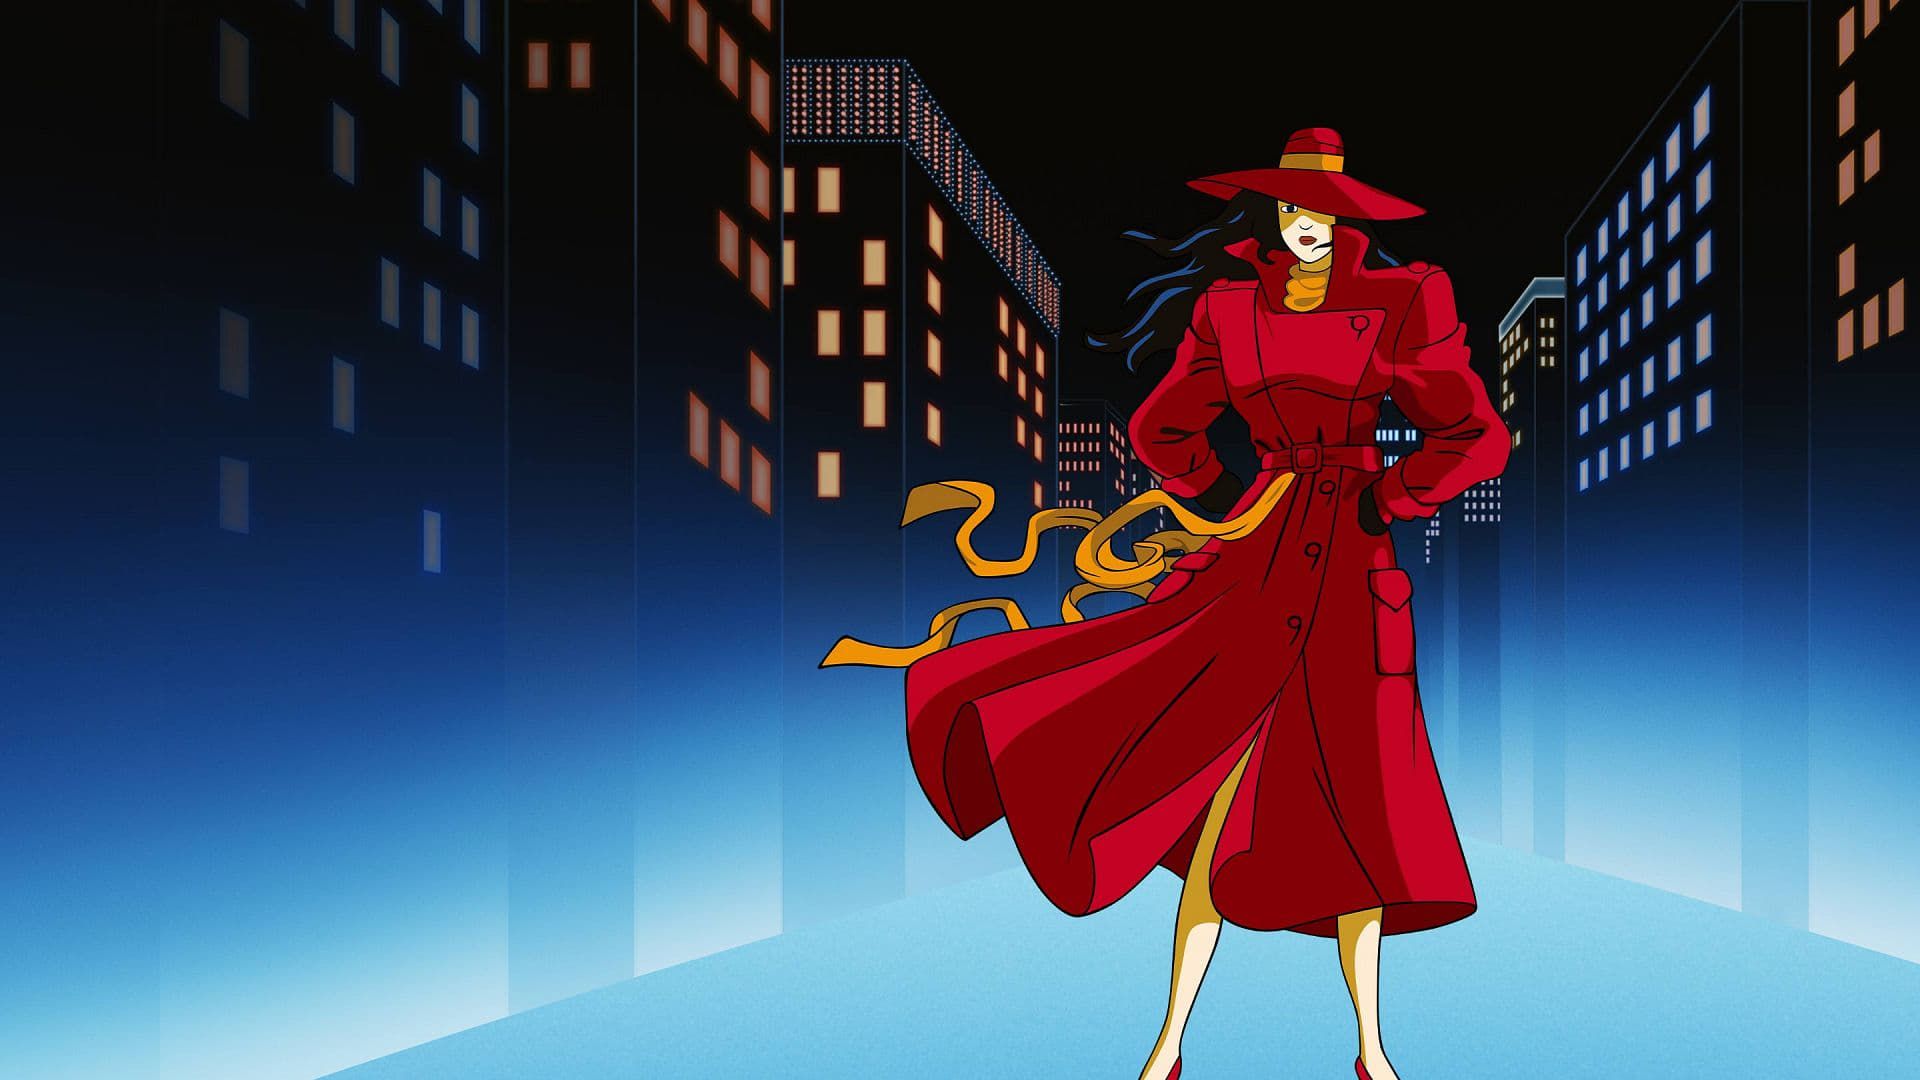 Where on Earth Is Carmen Sandiego? background